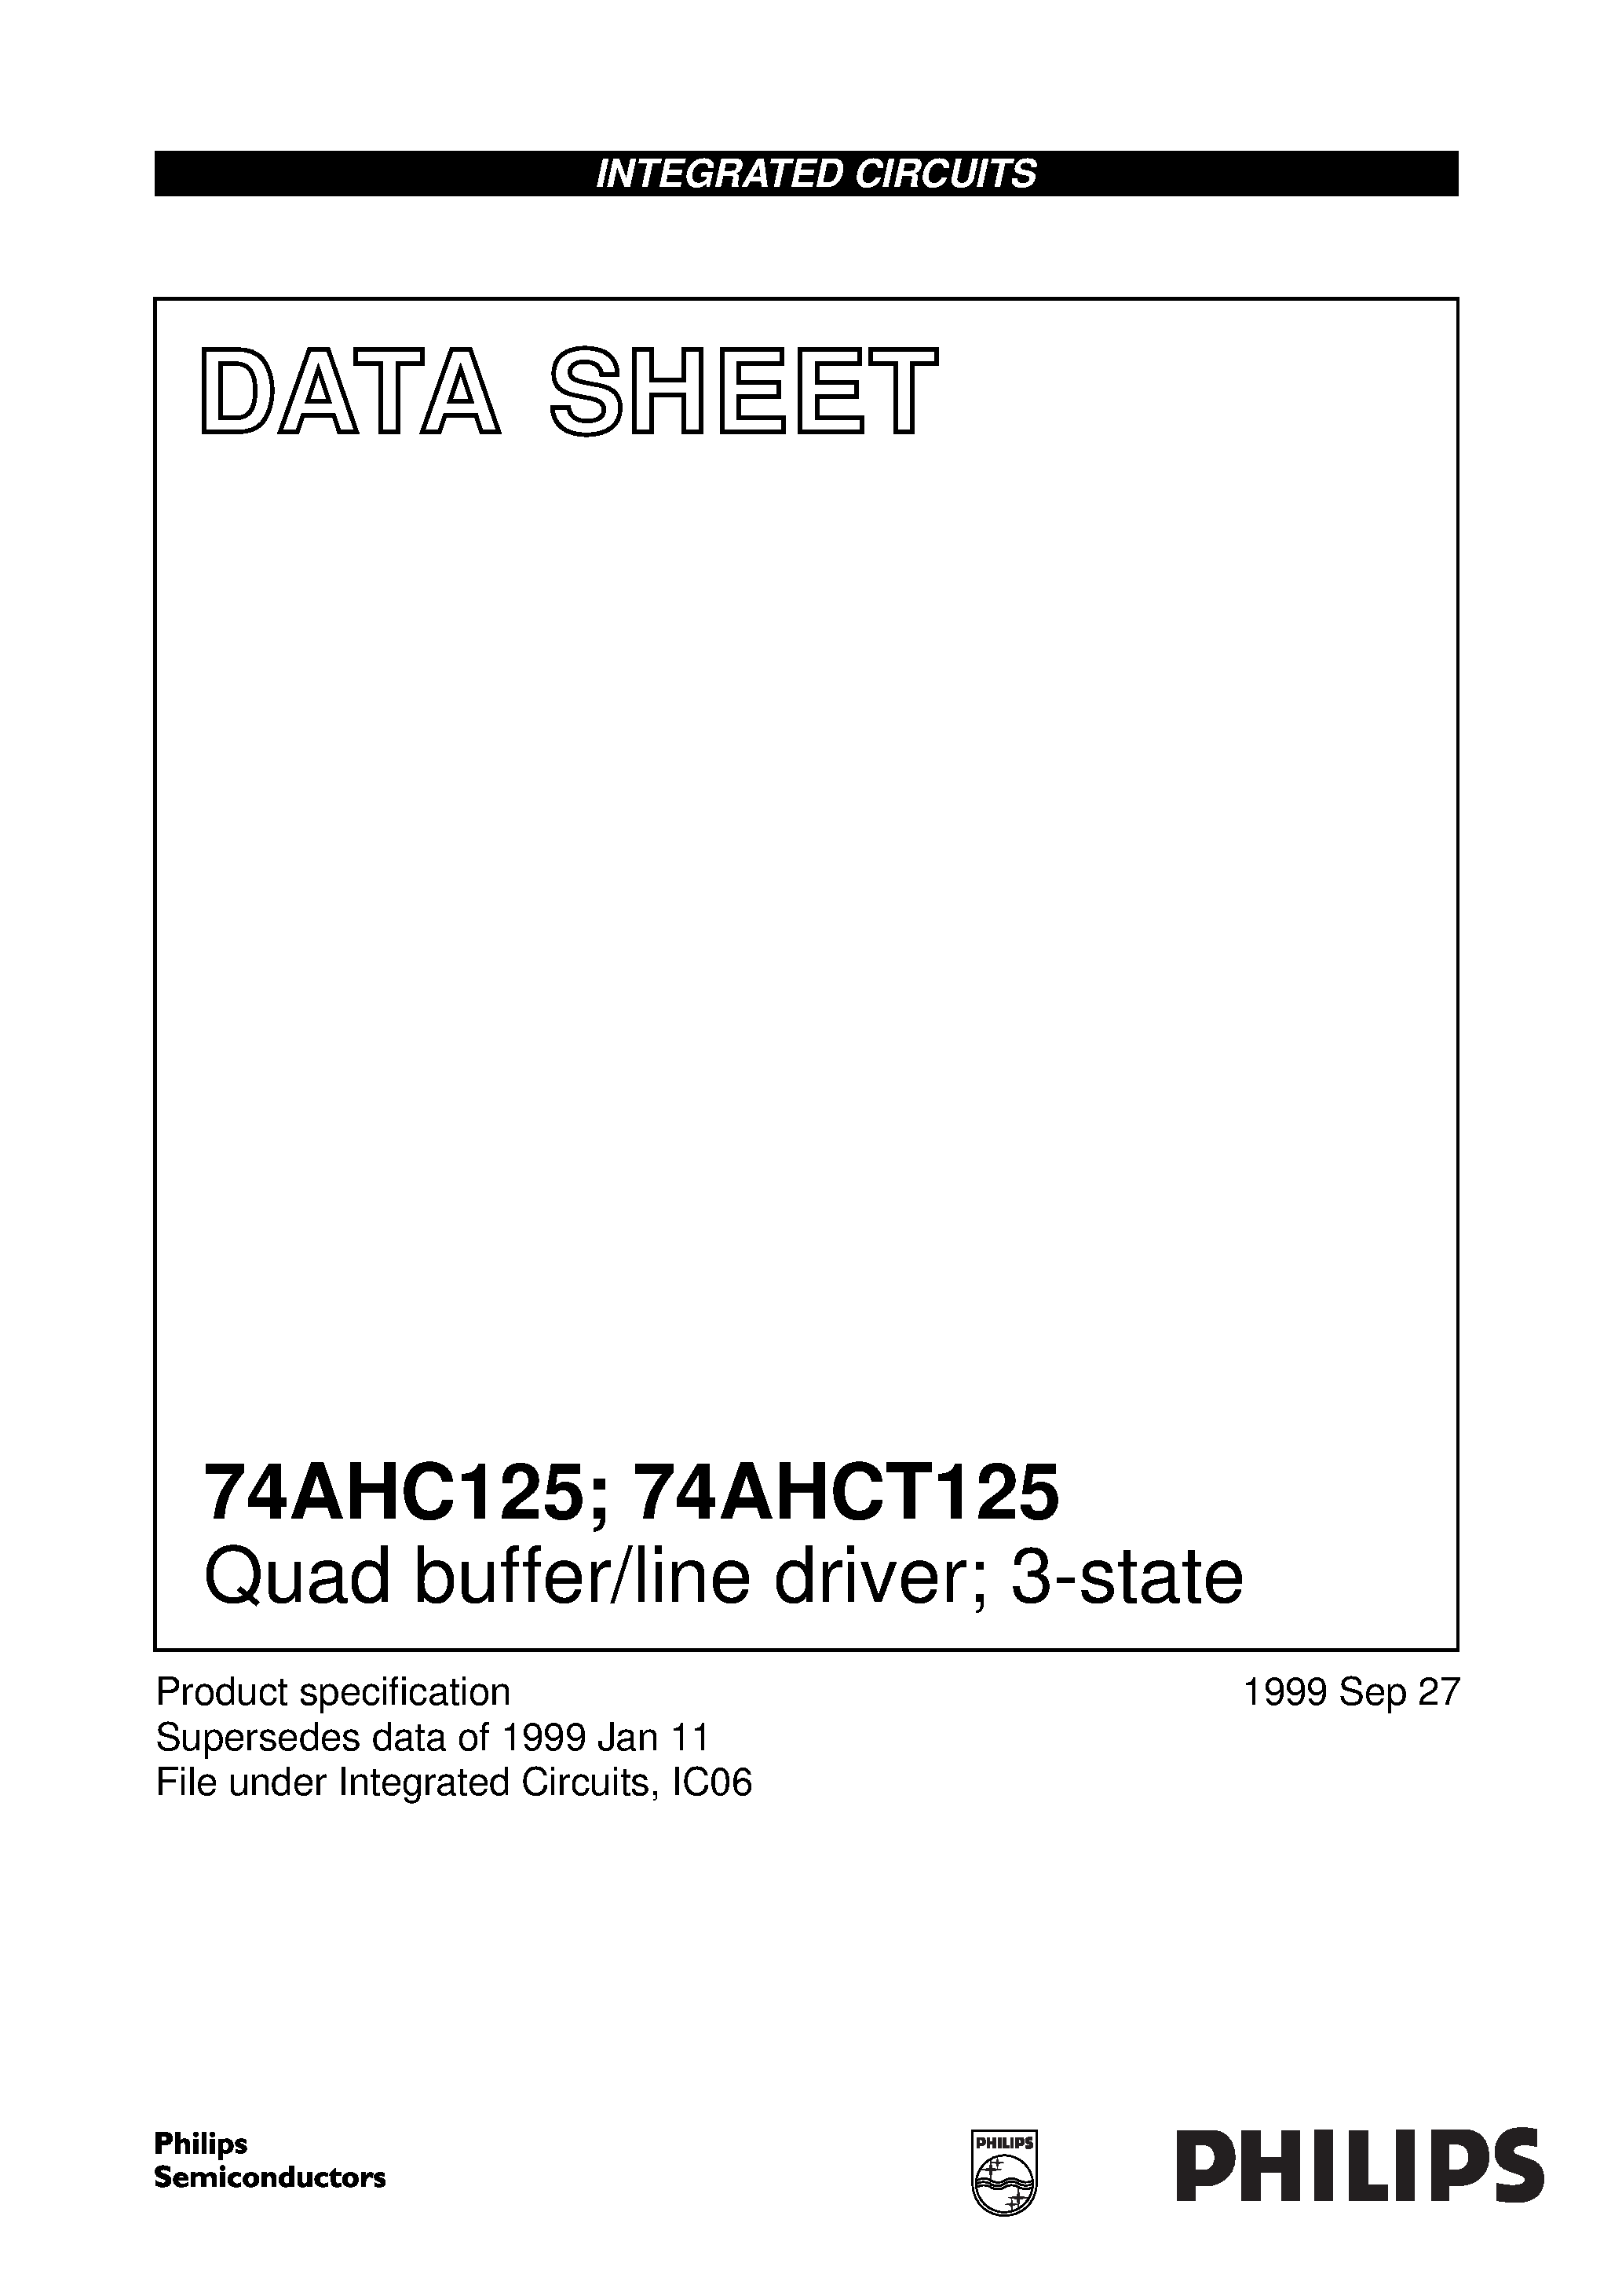 Datasheet 74AHC125D - Quad buffer/line driver; 3-state page 1